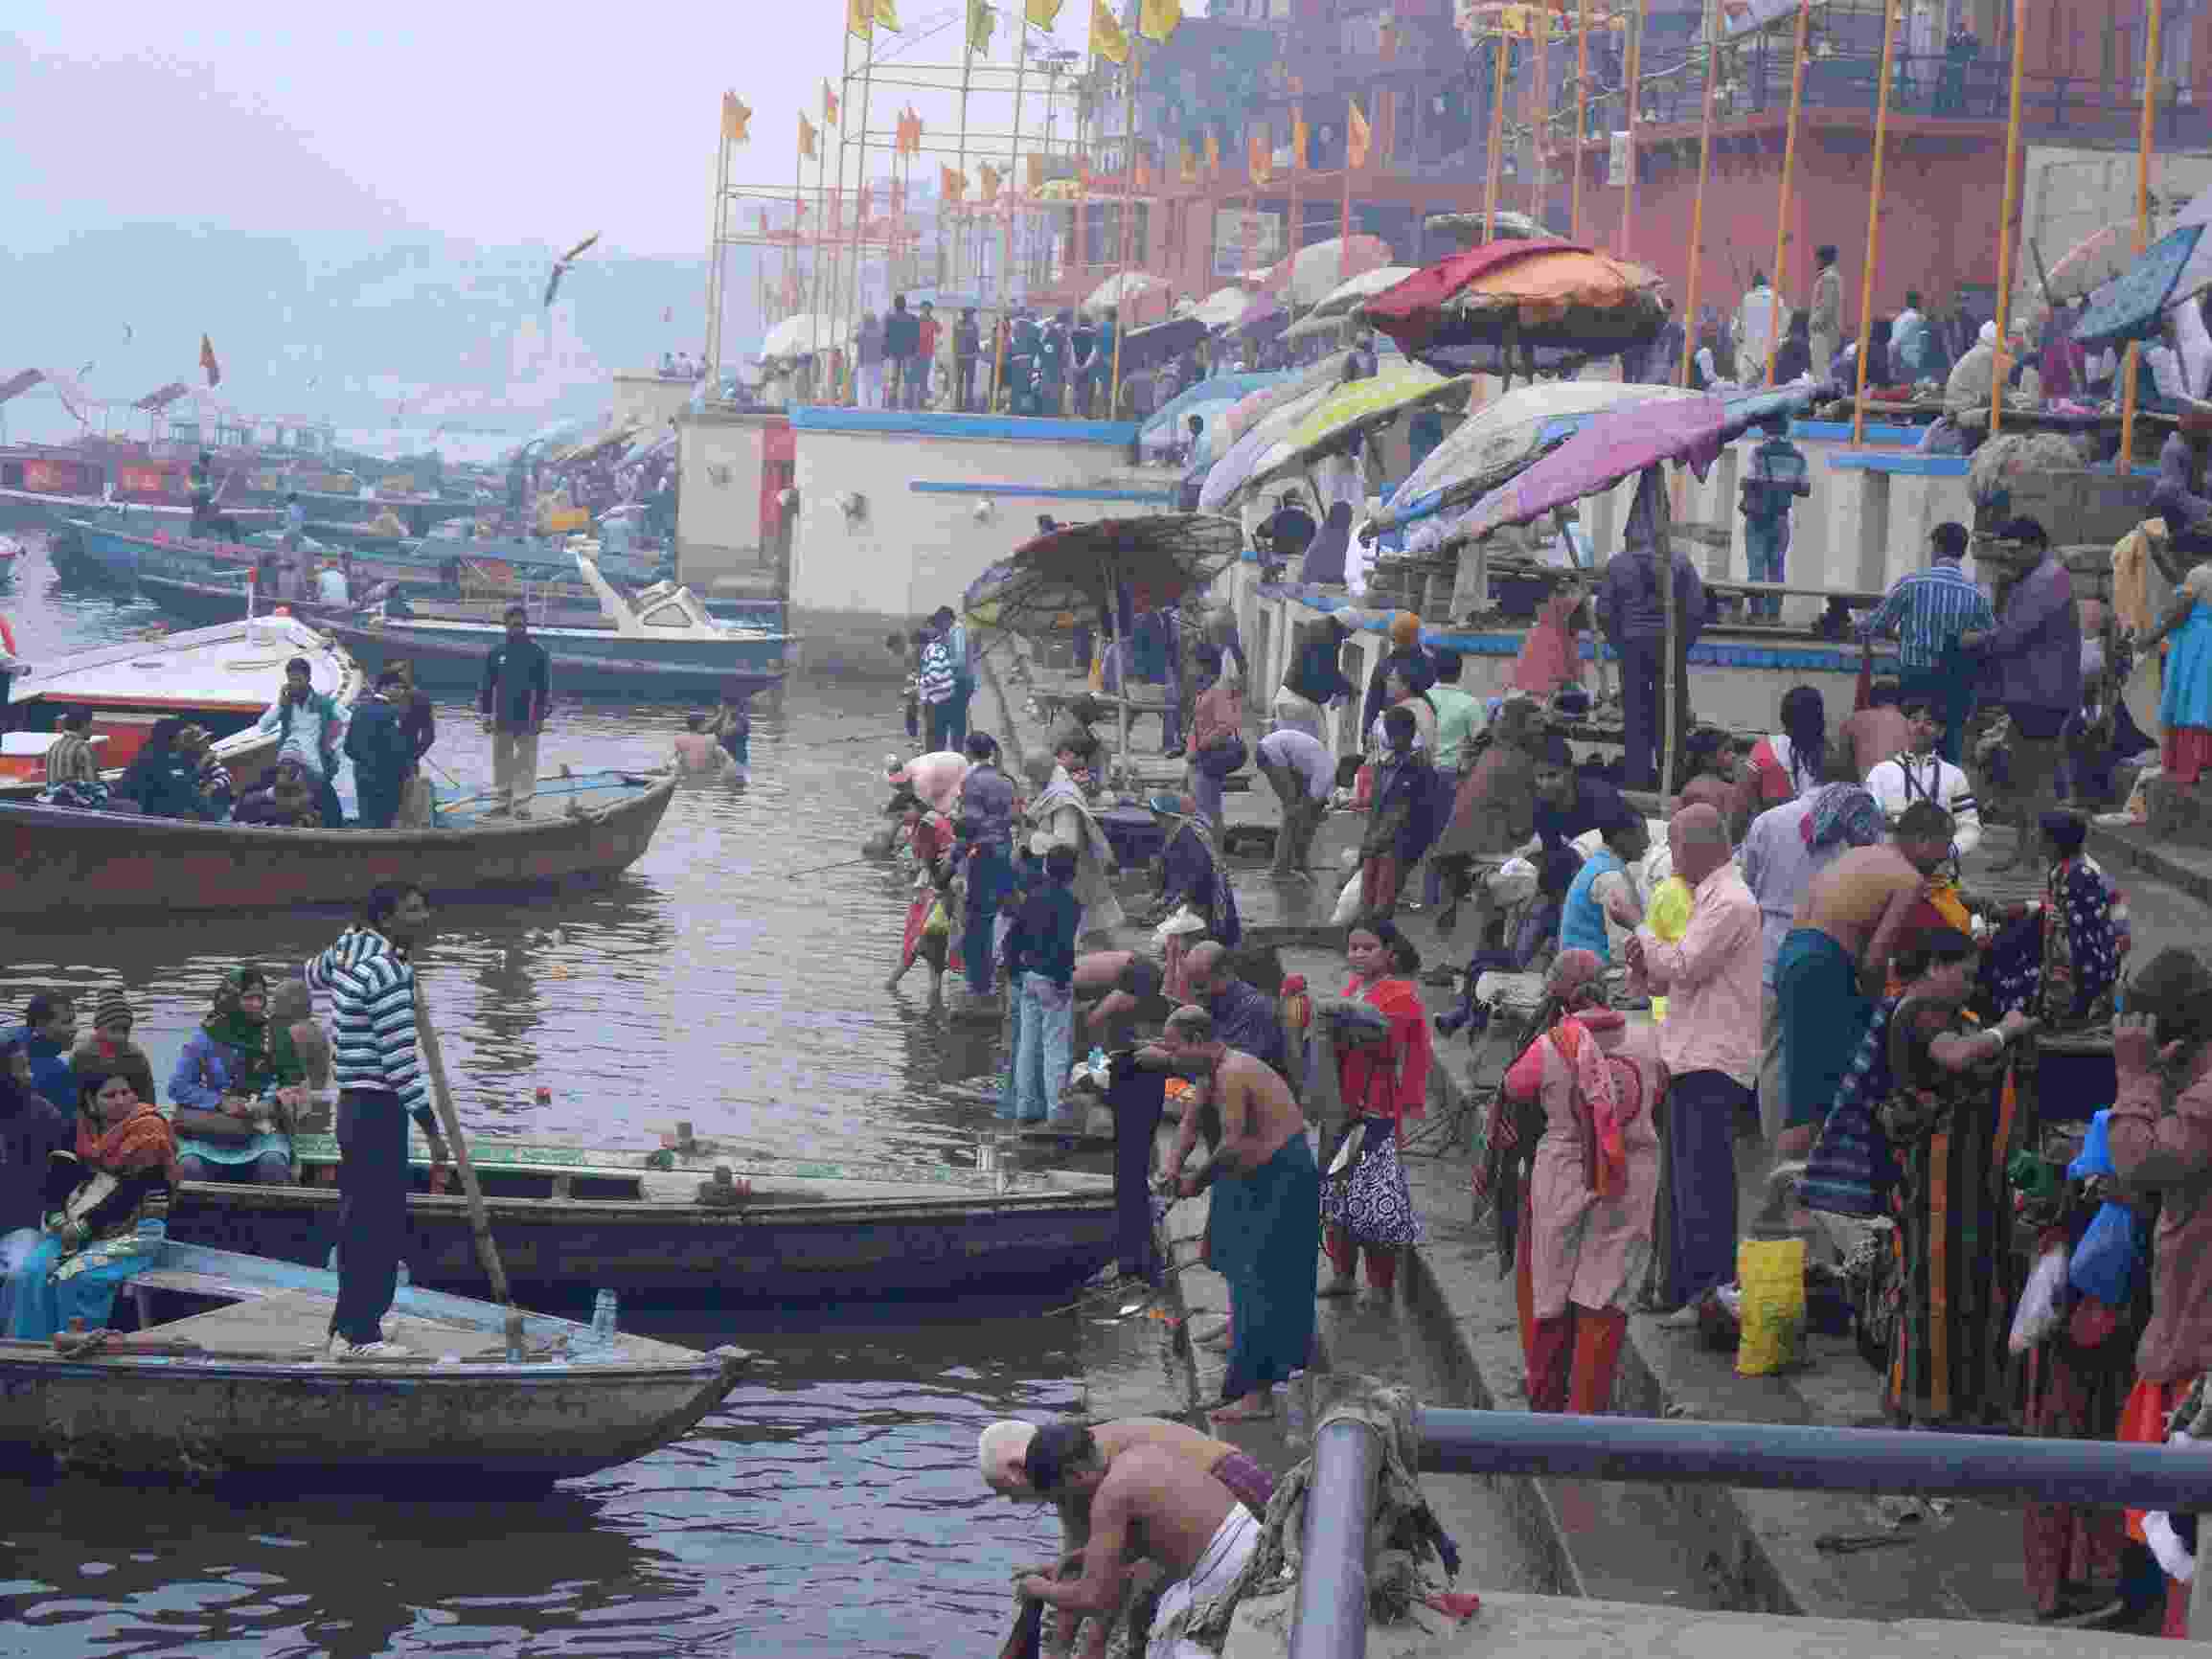 People selling food, washing clothes, bathing, and landing boats around one of the ghats on the banks of the River Ganges, Varanasi, India